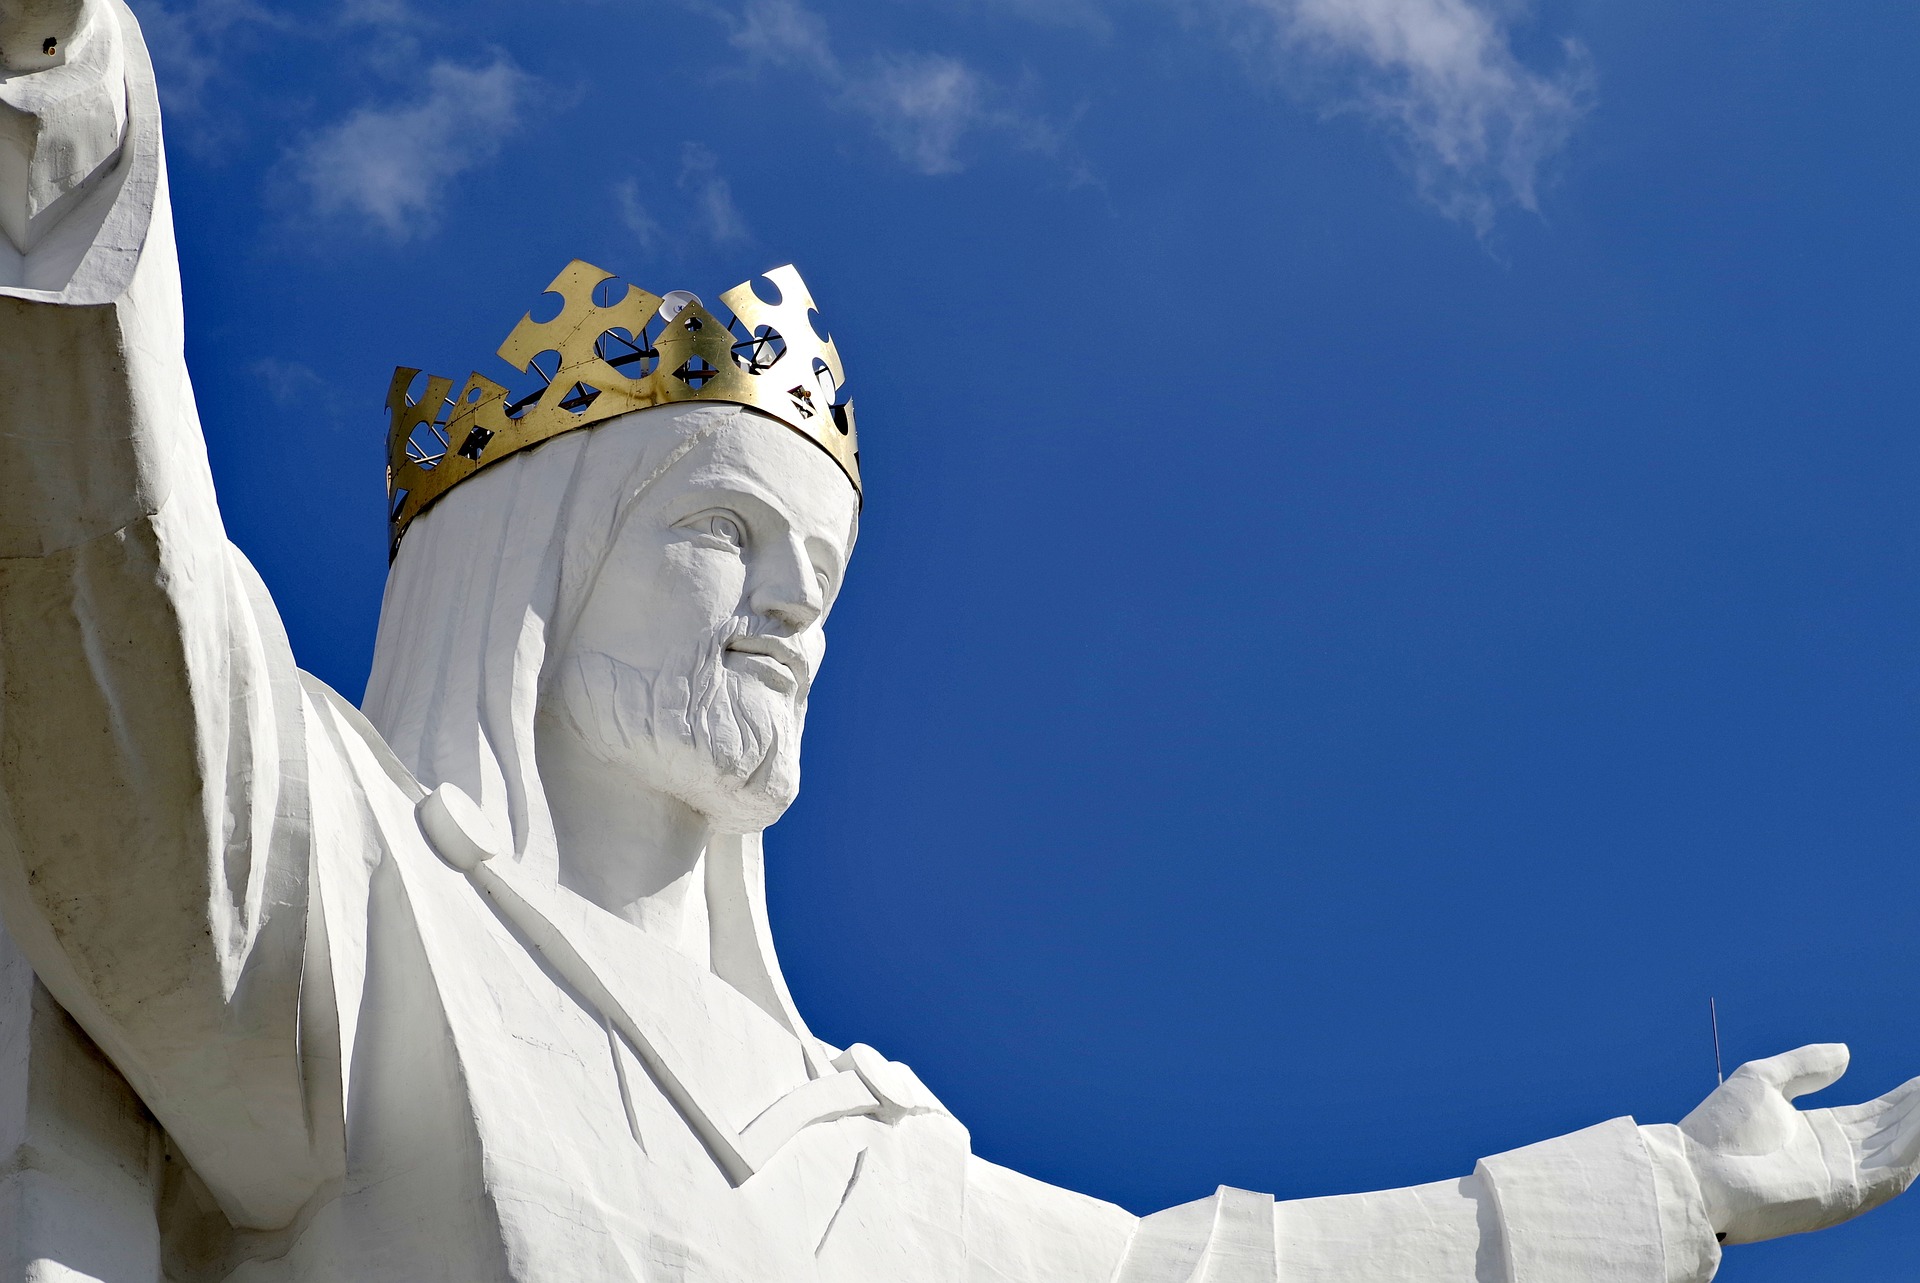 After His death for all humanity, Jesus is crowned King of all from today's reading with Wes Schaeffer.